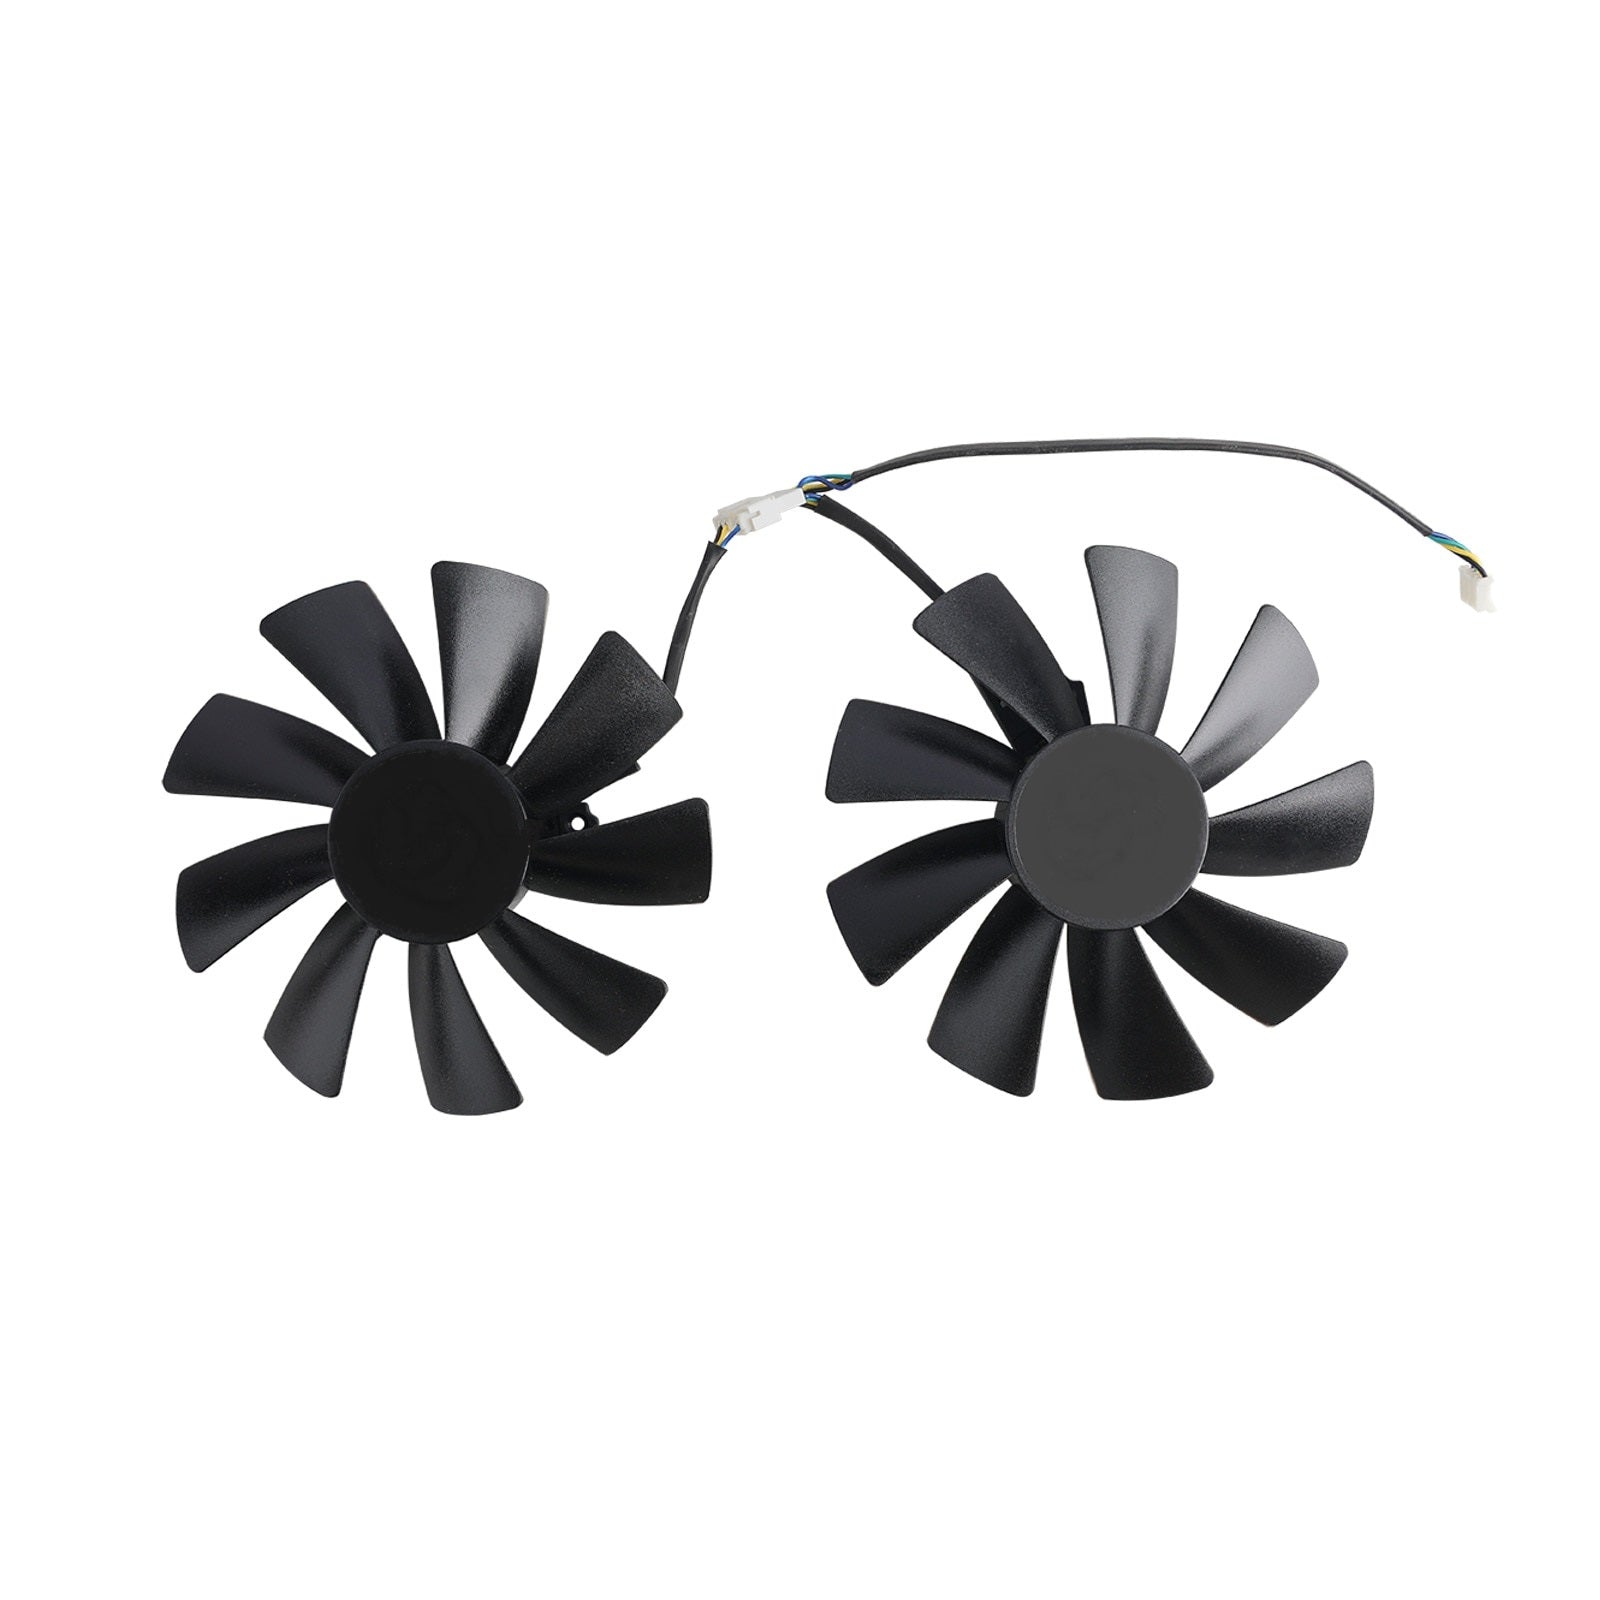 PNY GeForce RTX 3070 8GB UPRISING LHR Fan Replacement